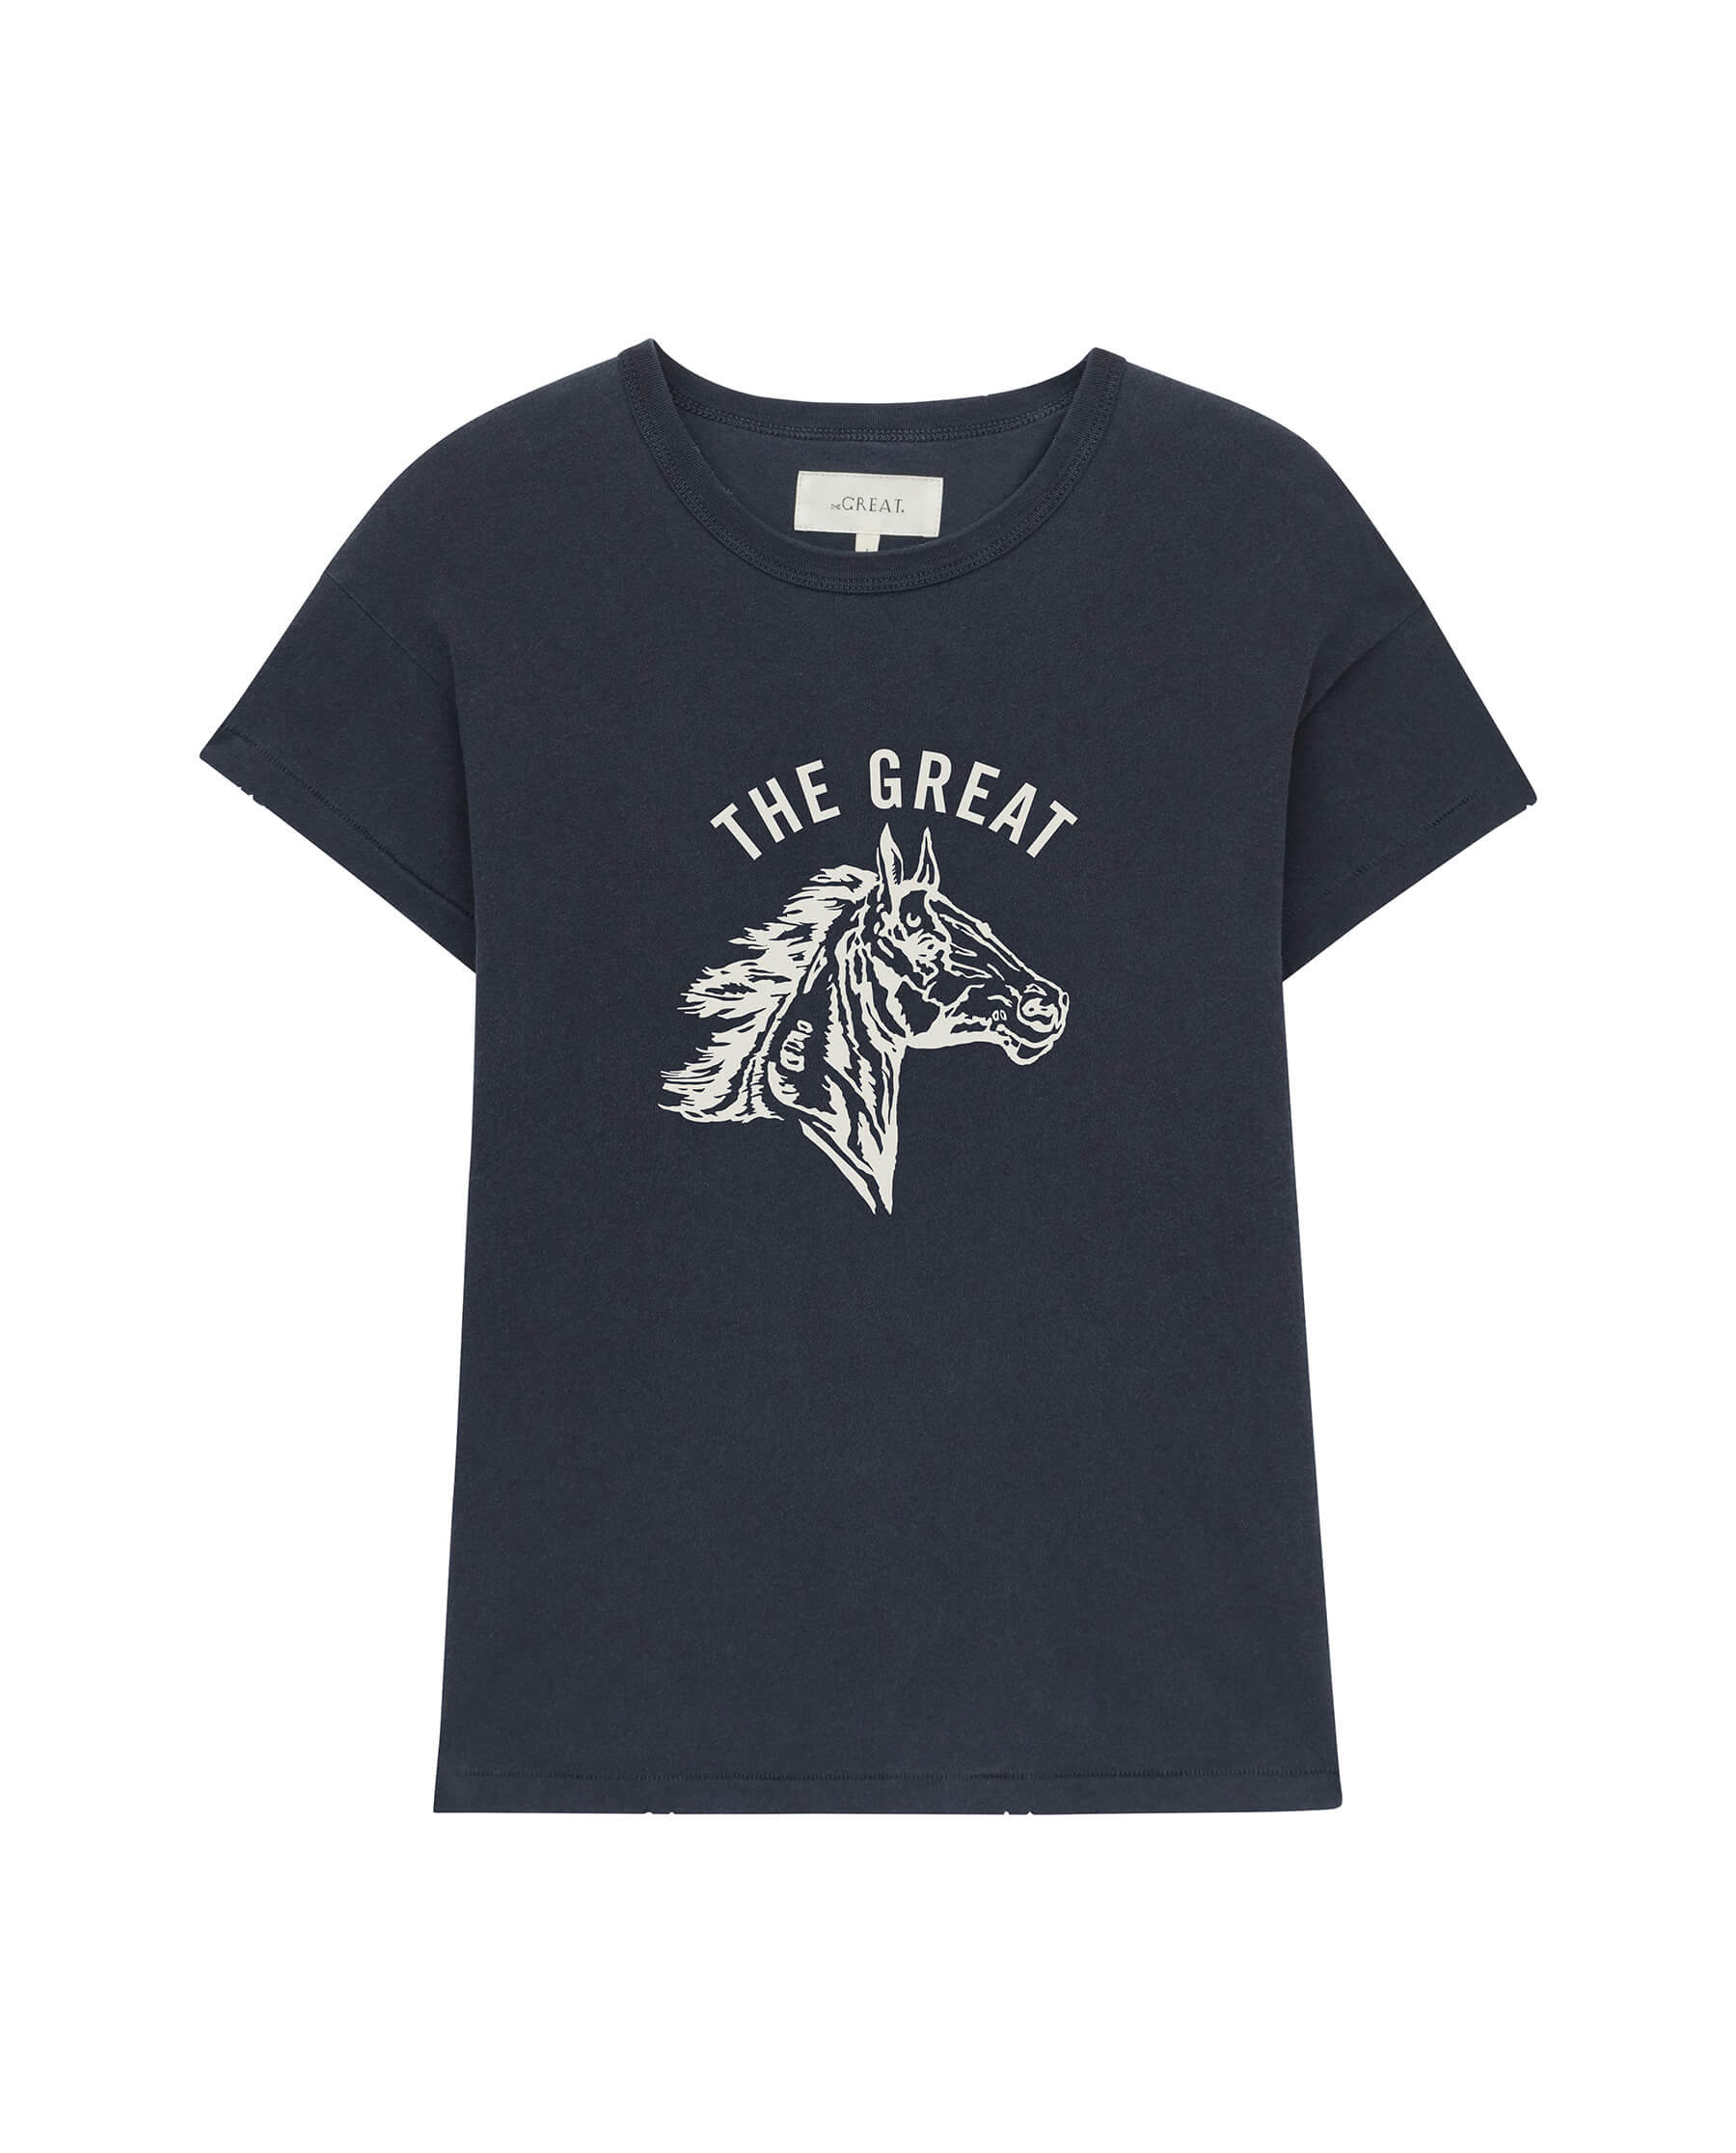 The Boxy Crew. Graphic -- Washed Navy with Cream Bronco Graphic